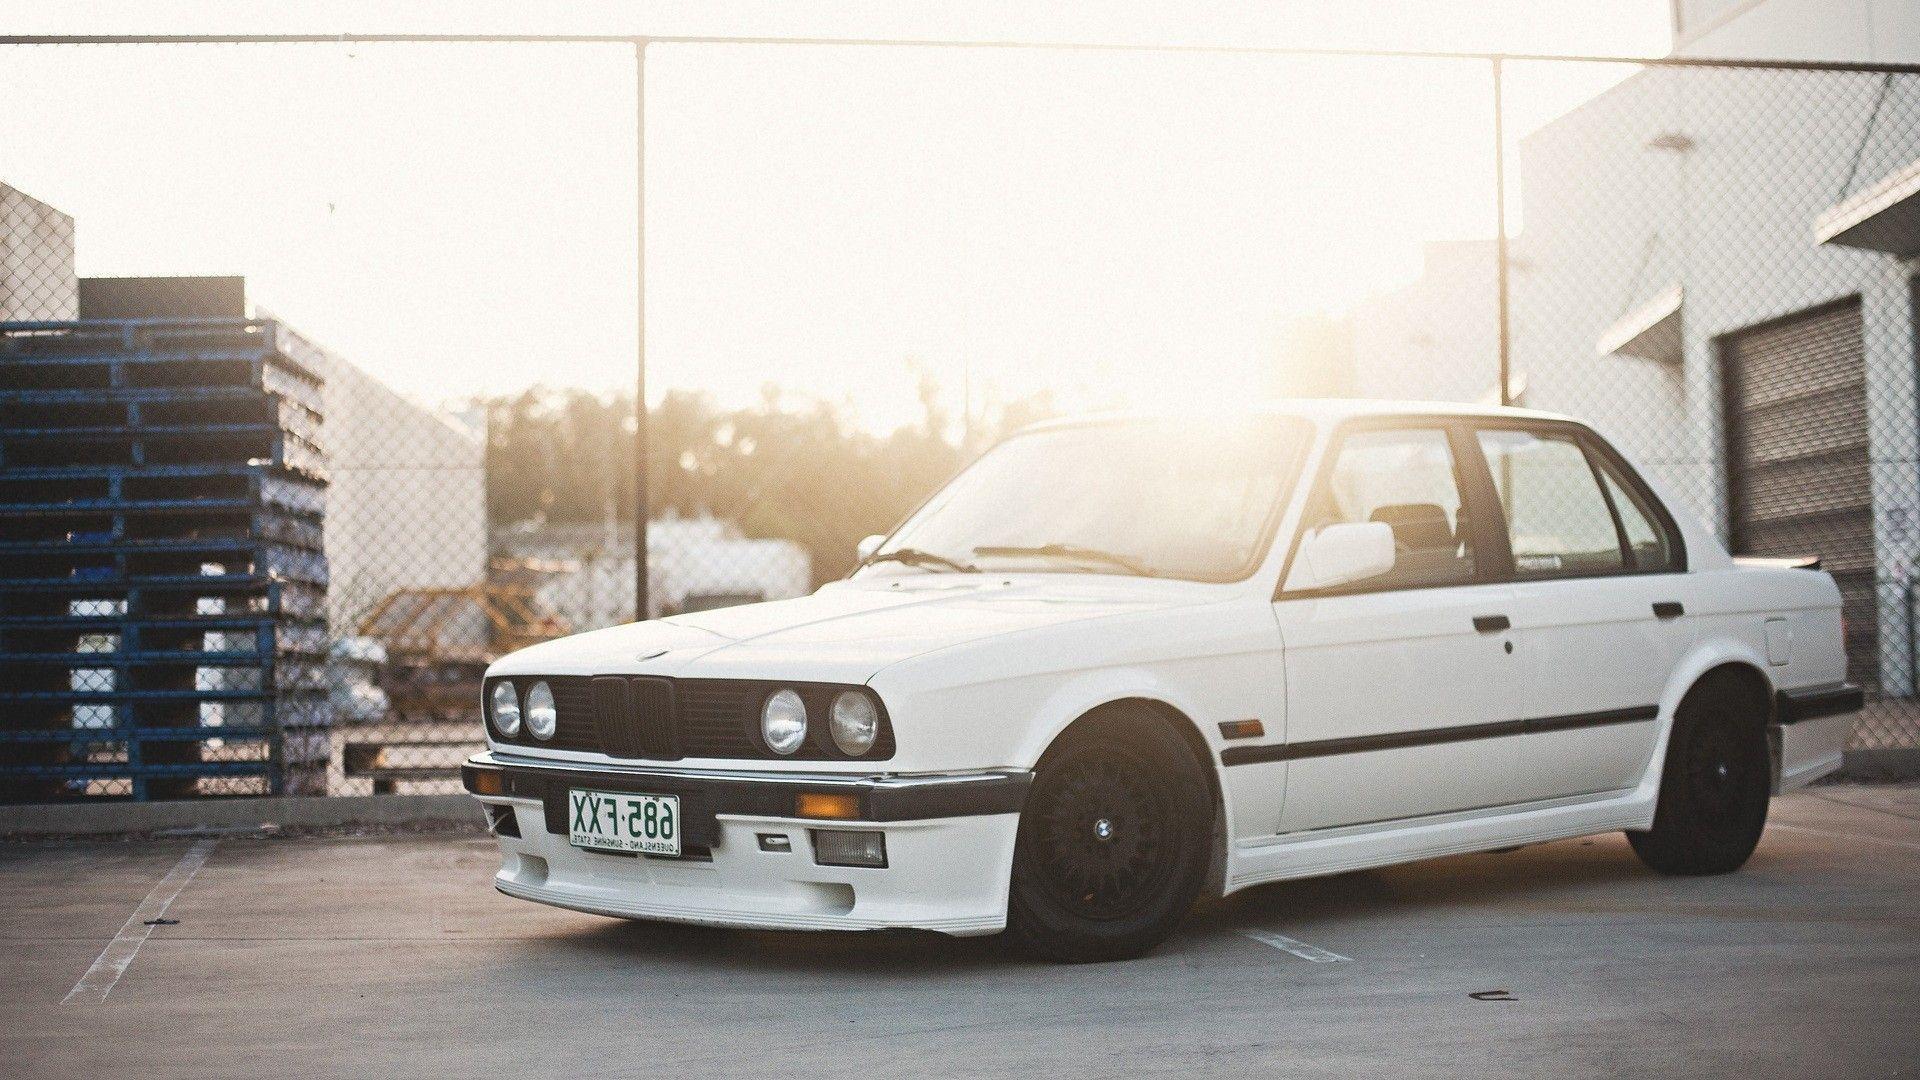 bmw e30 wallpaper 3 - Image And Wallpaper free to download